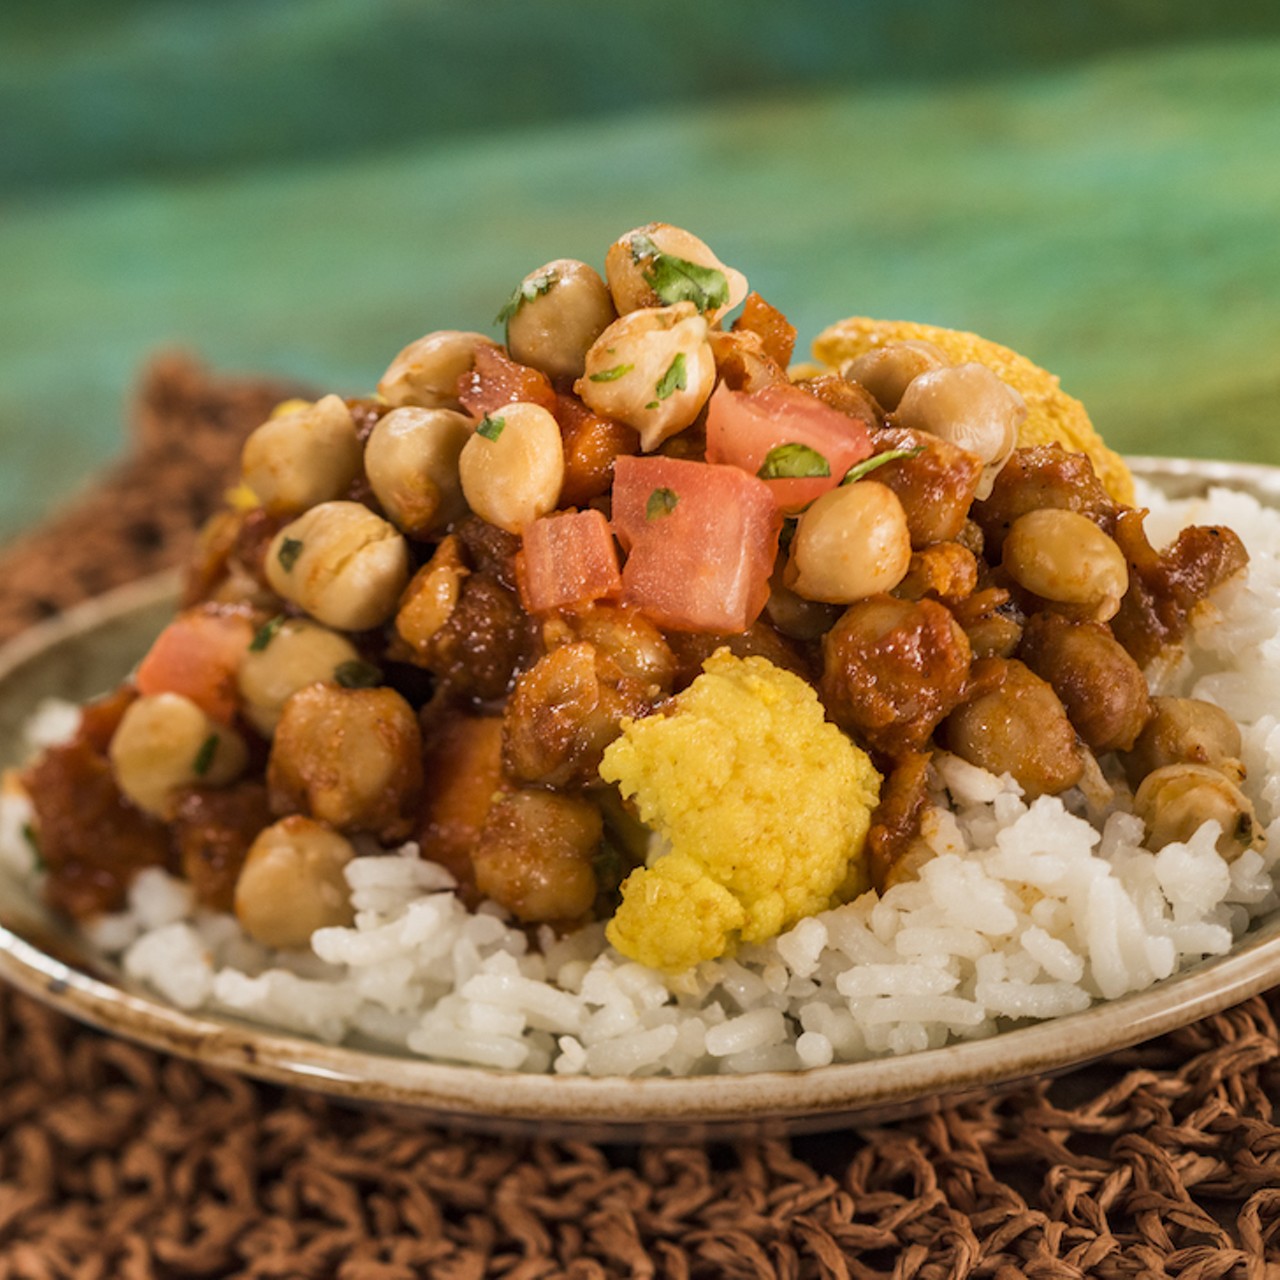 In India, sample the madras red curry. Curry lovers, you know what this vegan dish has in it: roasted cauliflower, baby carrots, chickpeas and basmati rice.